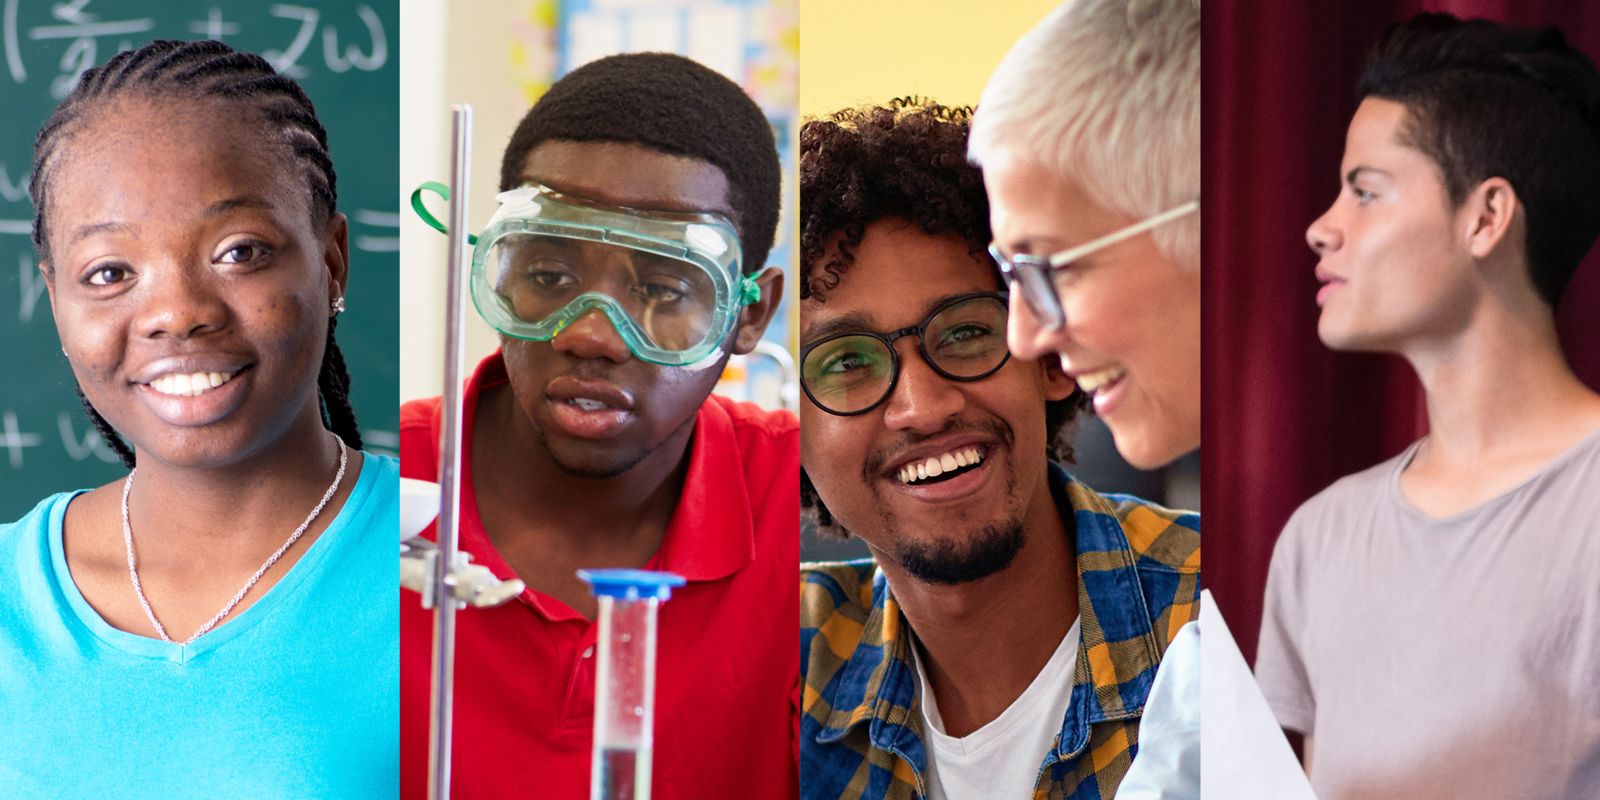 Four images representing Mathematics, Science, English, and the Arts. An African American female smiles and stands in front of a chalkboard with equations written on it wearing a teal v-neck shirt and a silver necklace. An African American male wearing goggles along with a red polo shirt and using science implements represents science. English is represented by a Latino male wearing glasses with a blue and yellow plaid shirt over a white t-shirt smiling at his instructor a Caucasian female with white hair and glasses wearing a white shirt. A Caucasian male wearing ballet clothes standing on a stage and reading a scrip represents the arts.